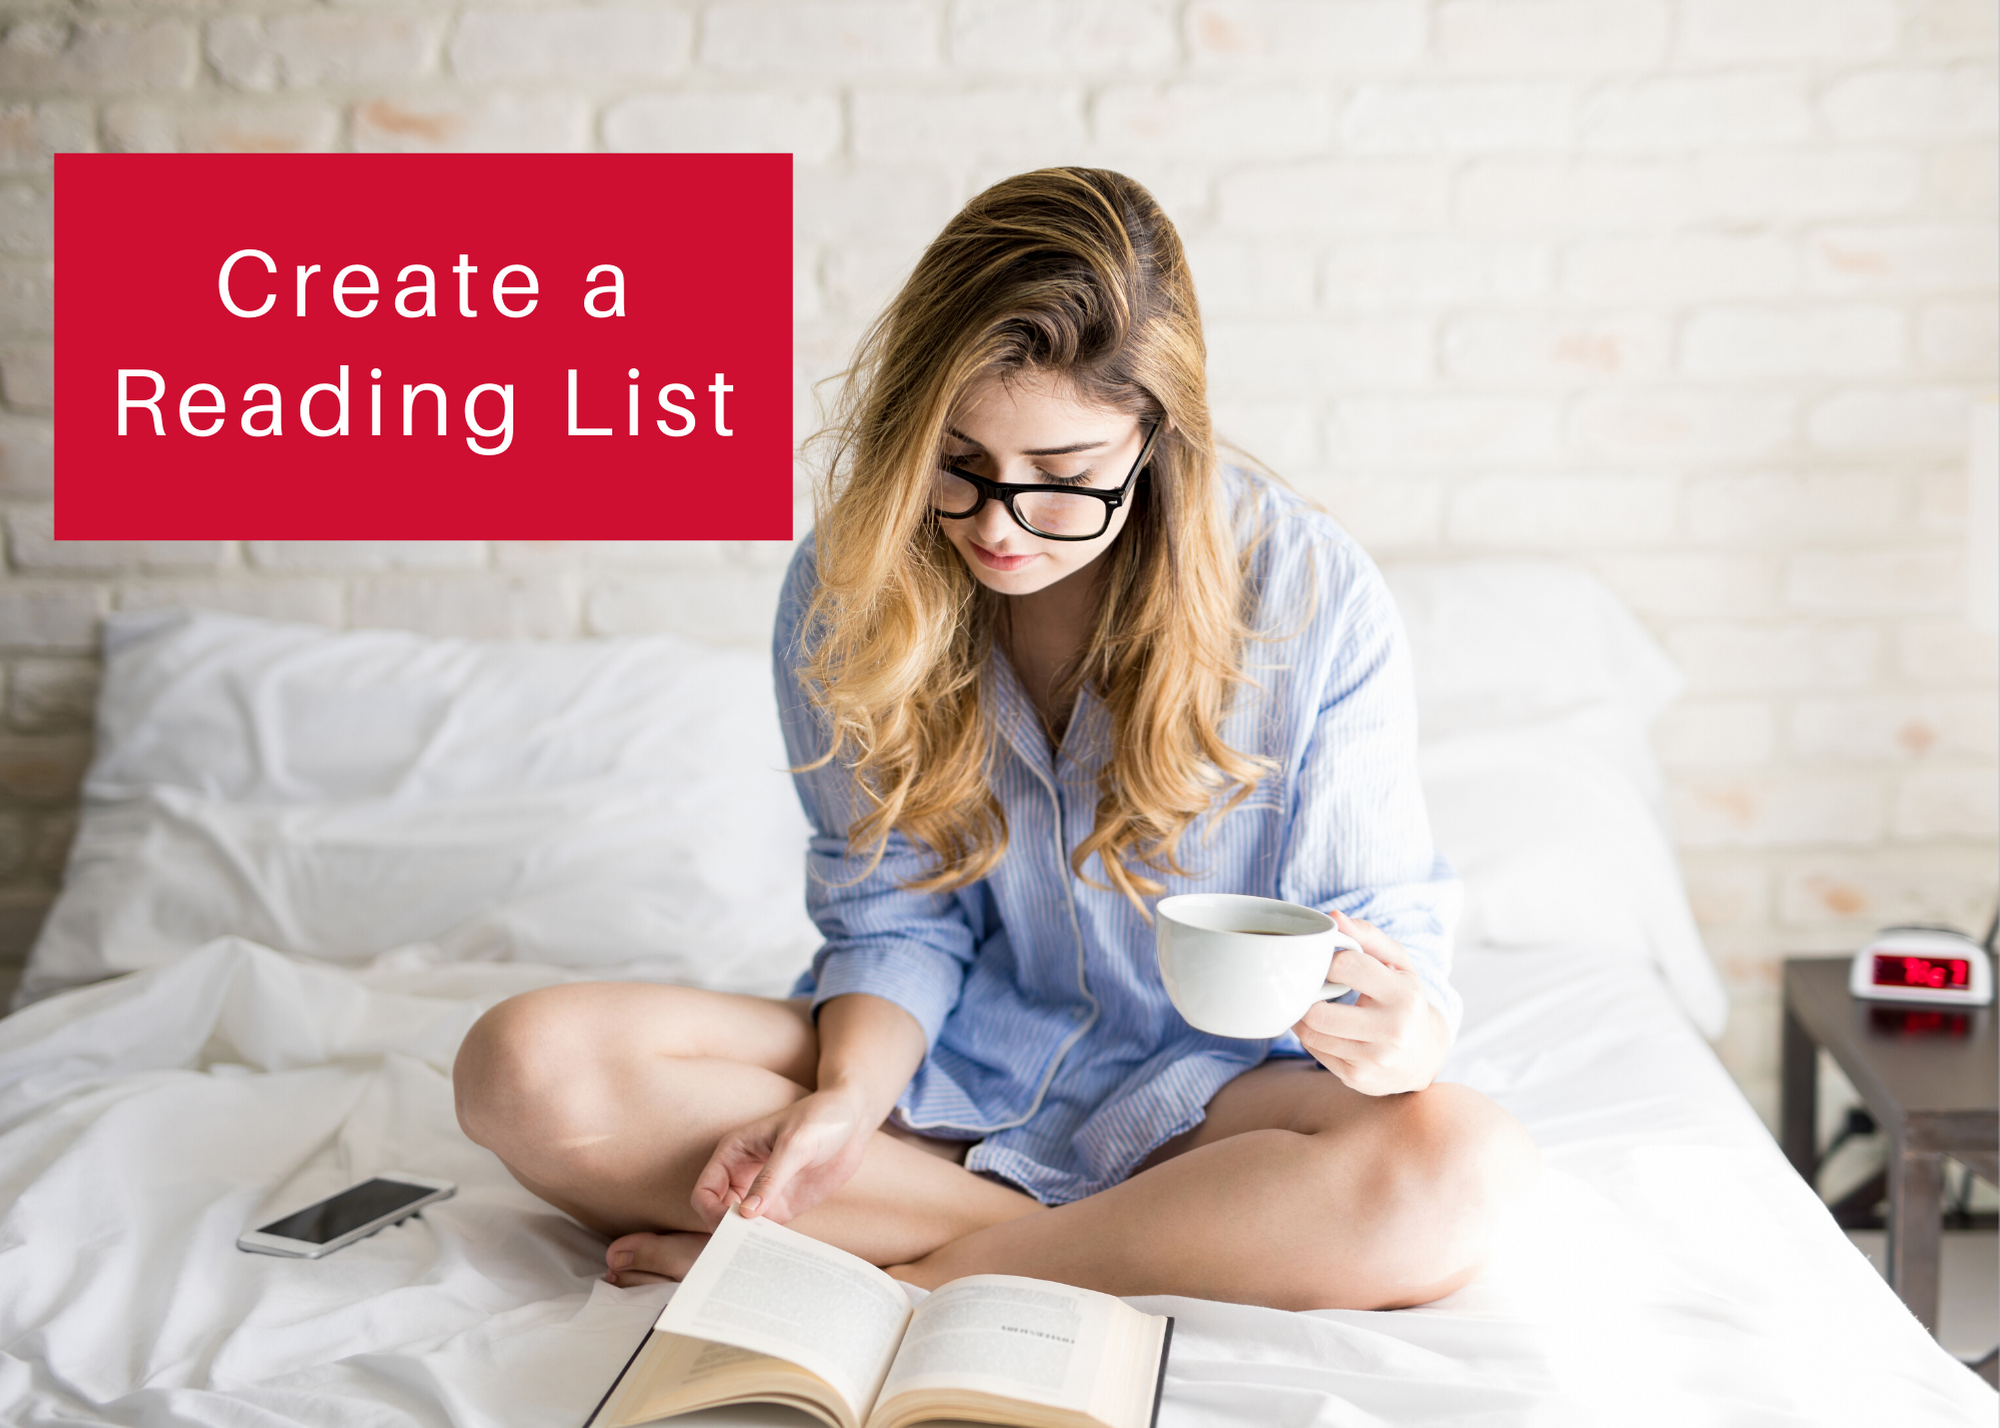 Create a Reading List - woman reading